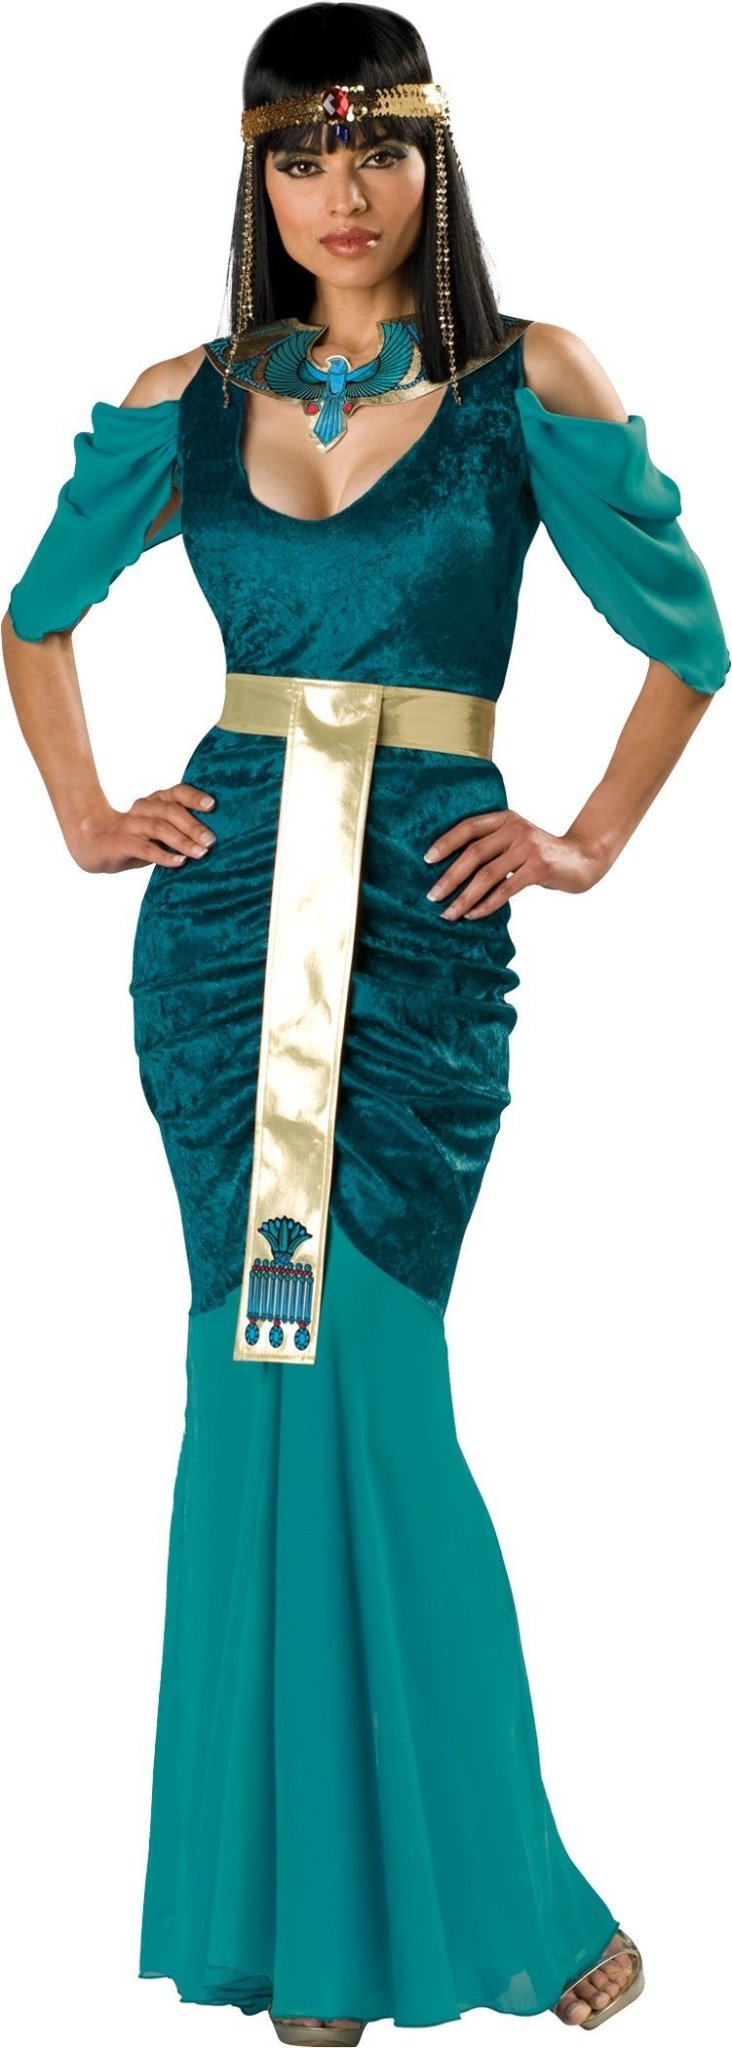 Egyptian Jewel Costume - JJ's Party House